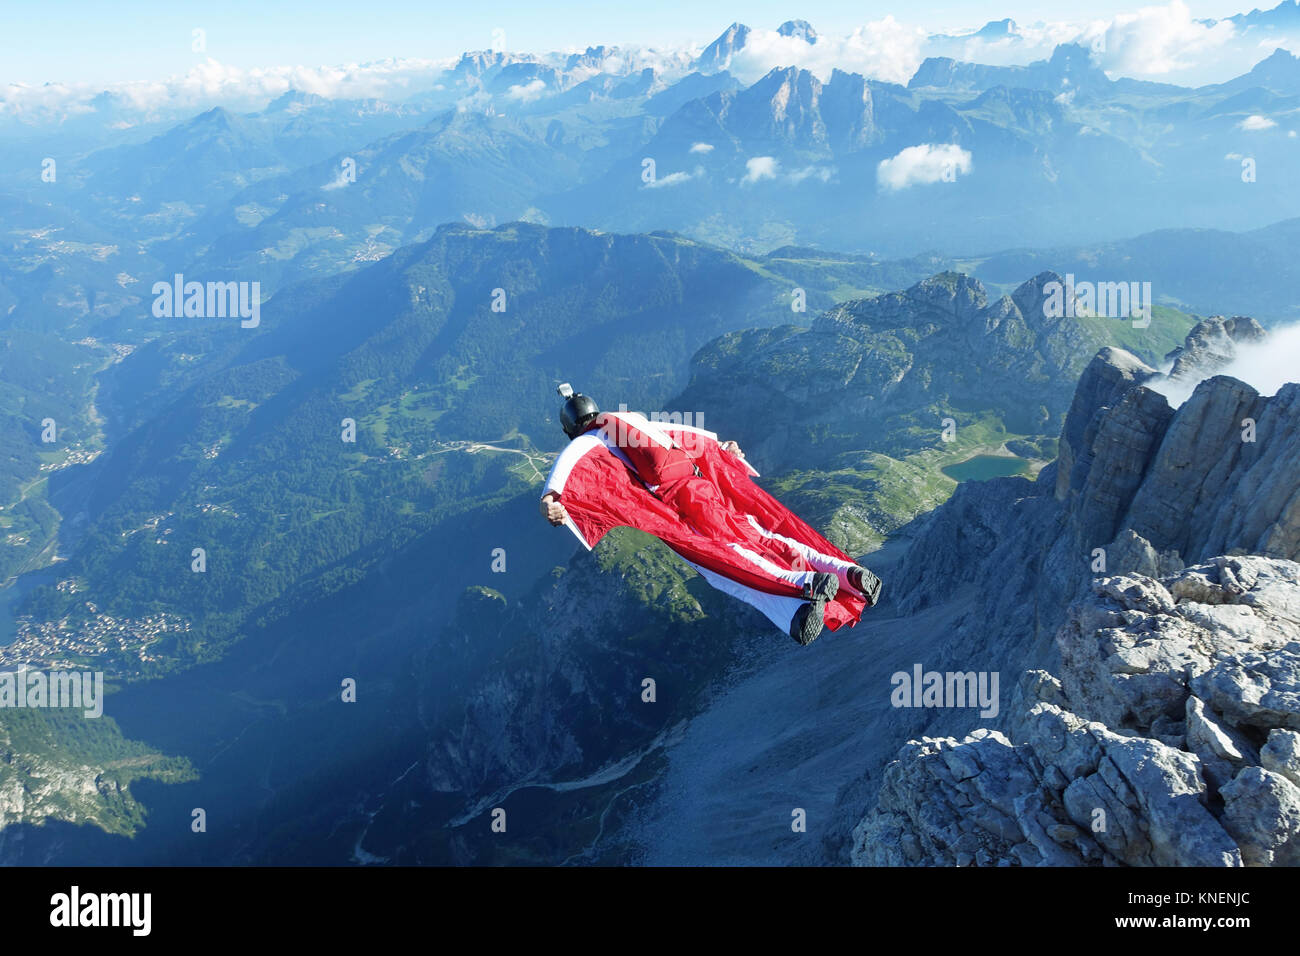 Male wingsuit BASE jumper taking off from cliff edge Stock Photo